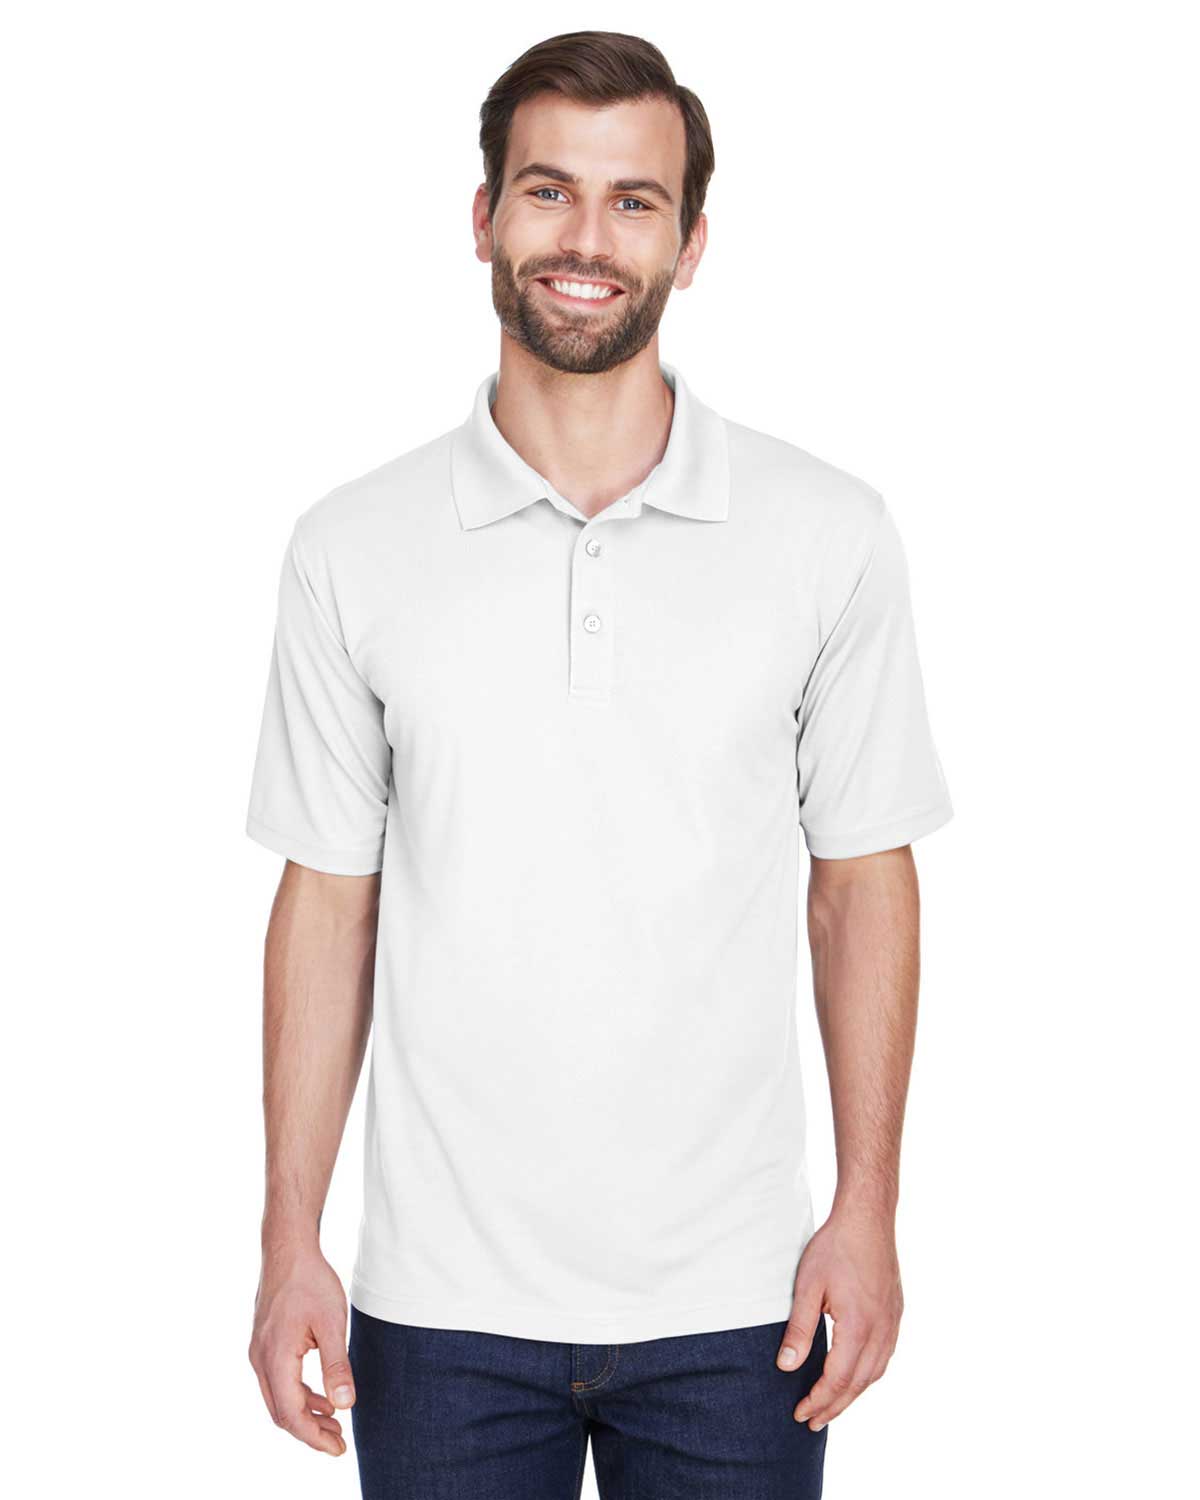 UltraClub 8210T Men Tall Cool & Dry Mesh Pique Polo at Apparelstation